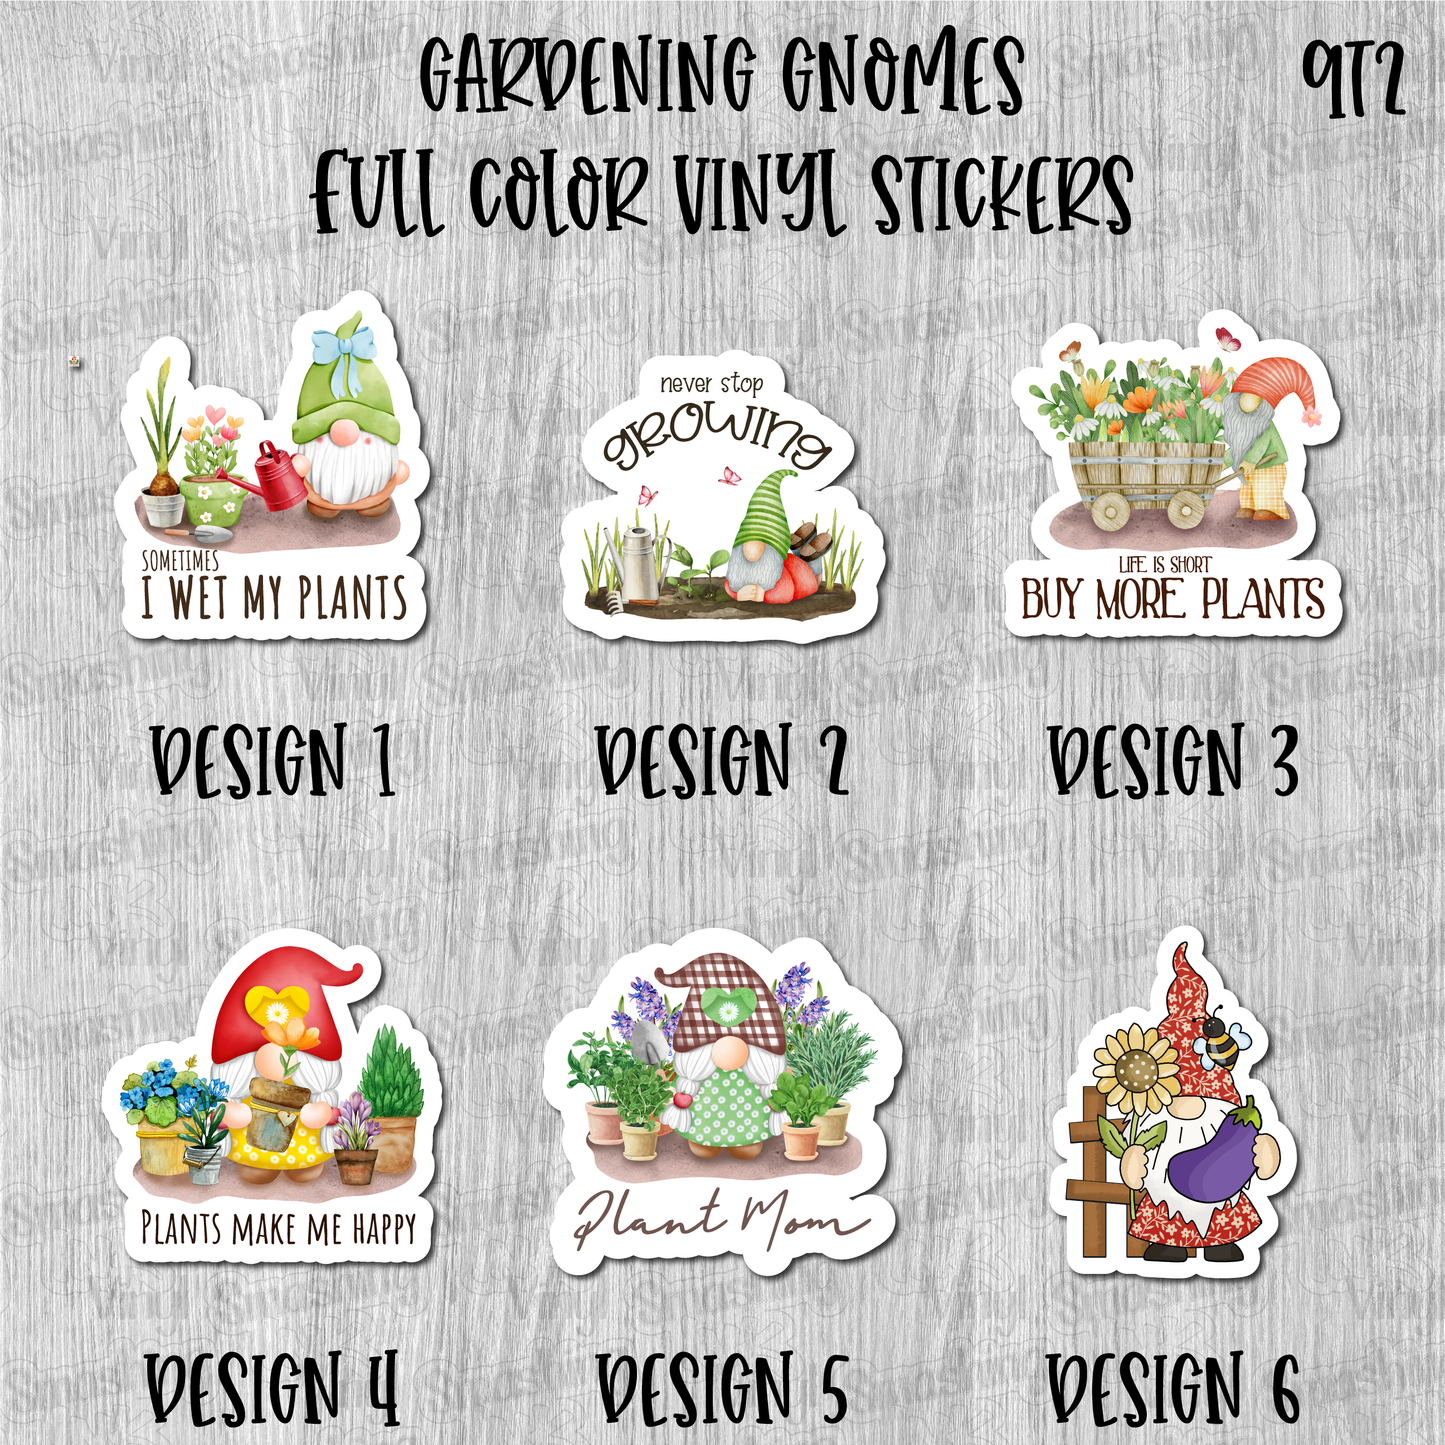 Gardening Gnomes - Full Color Vinyl Stickers (SHIPS IN 3-7 BUS DAYS)